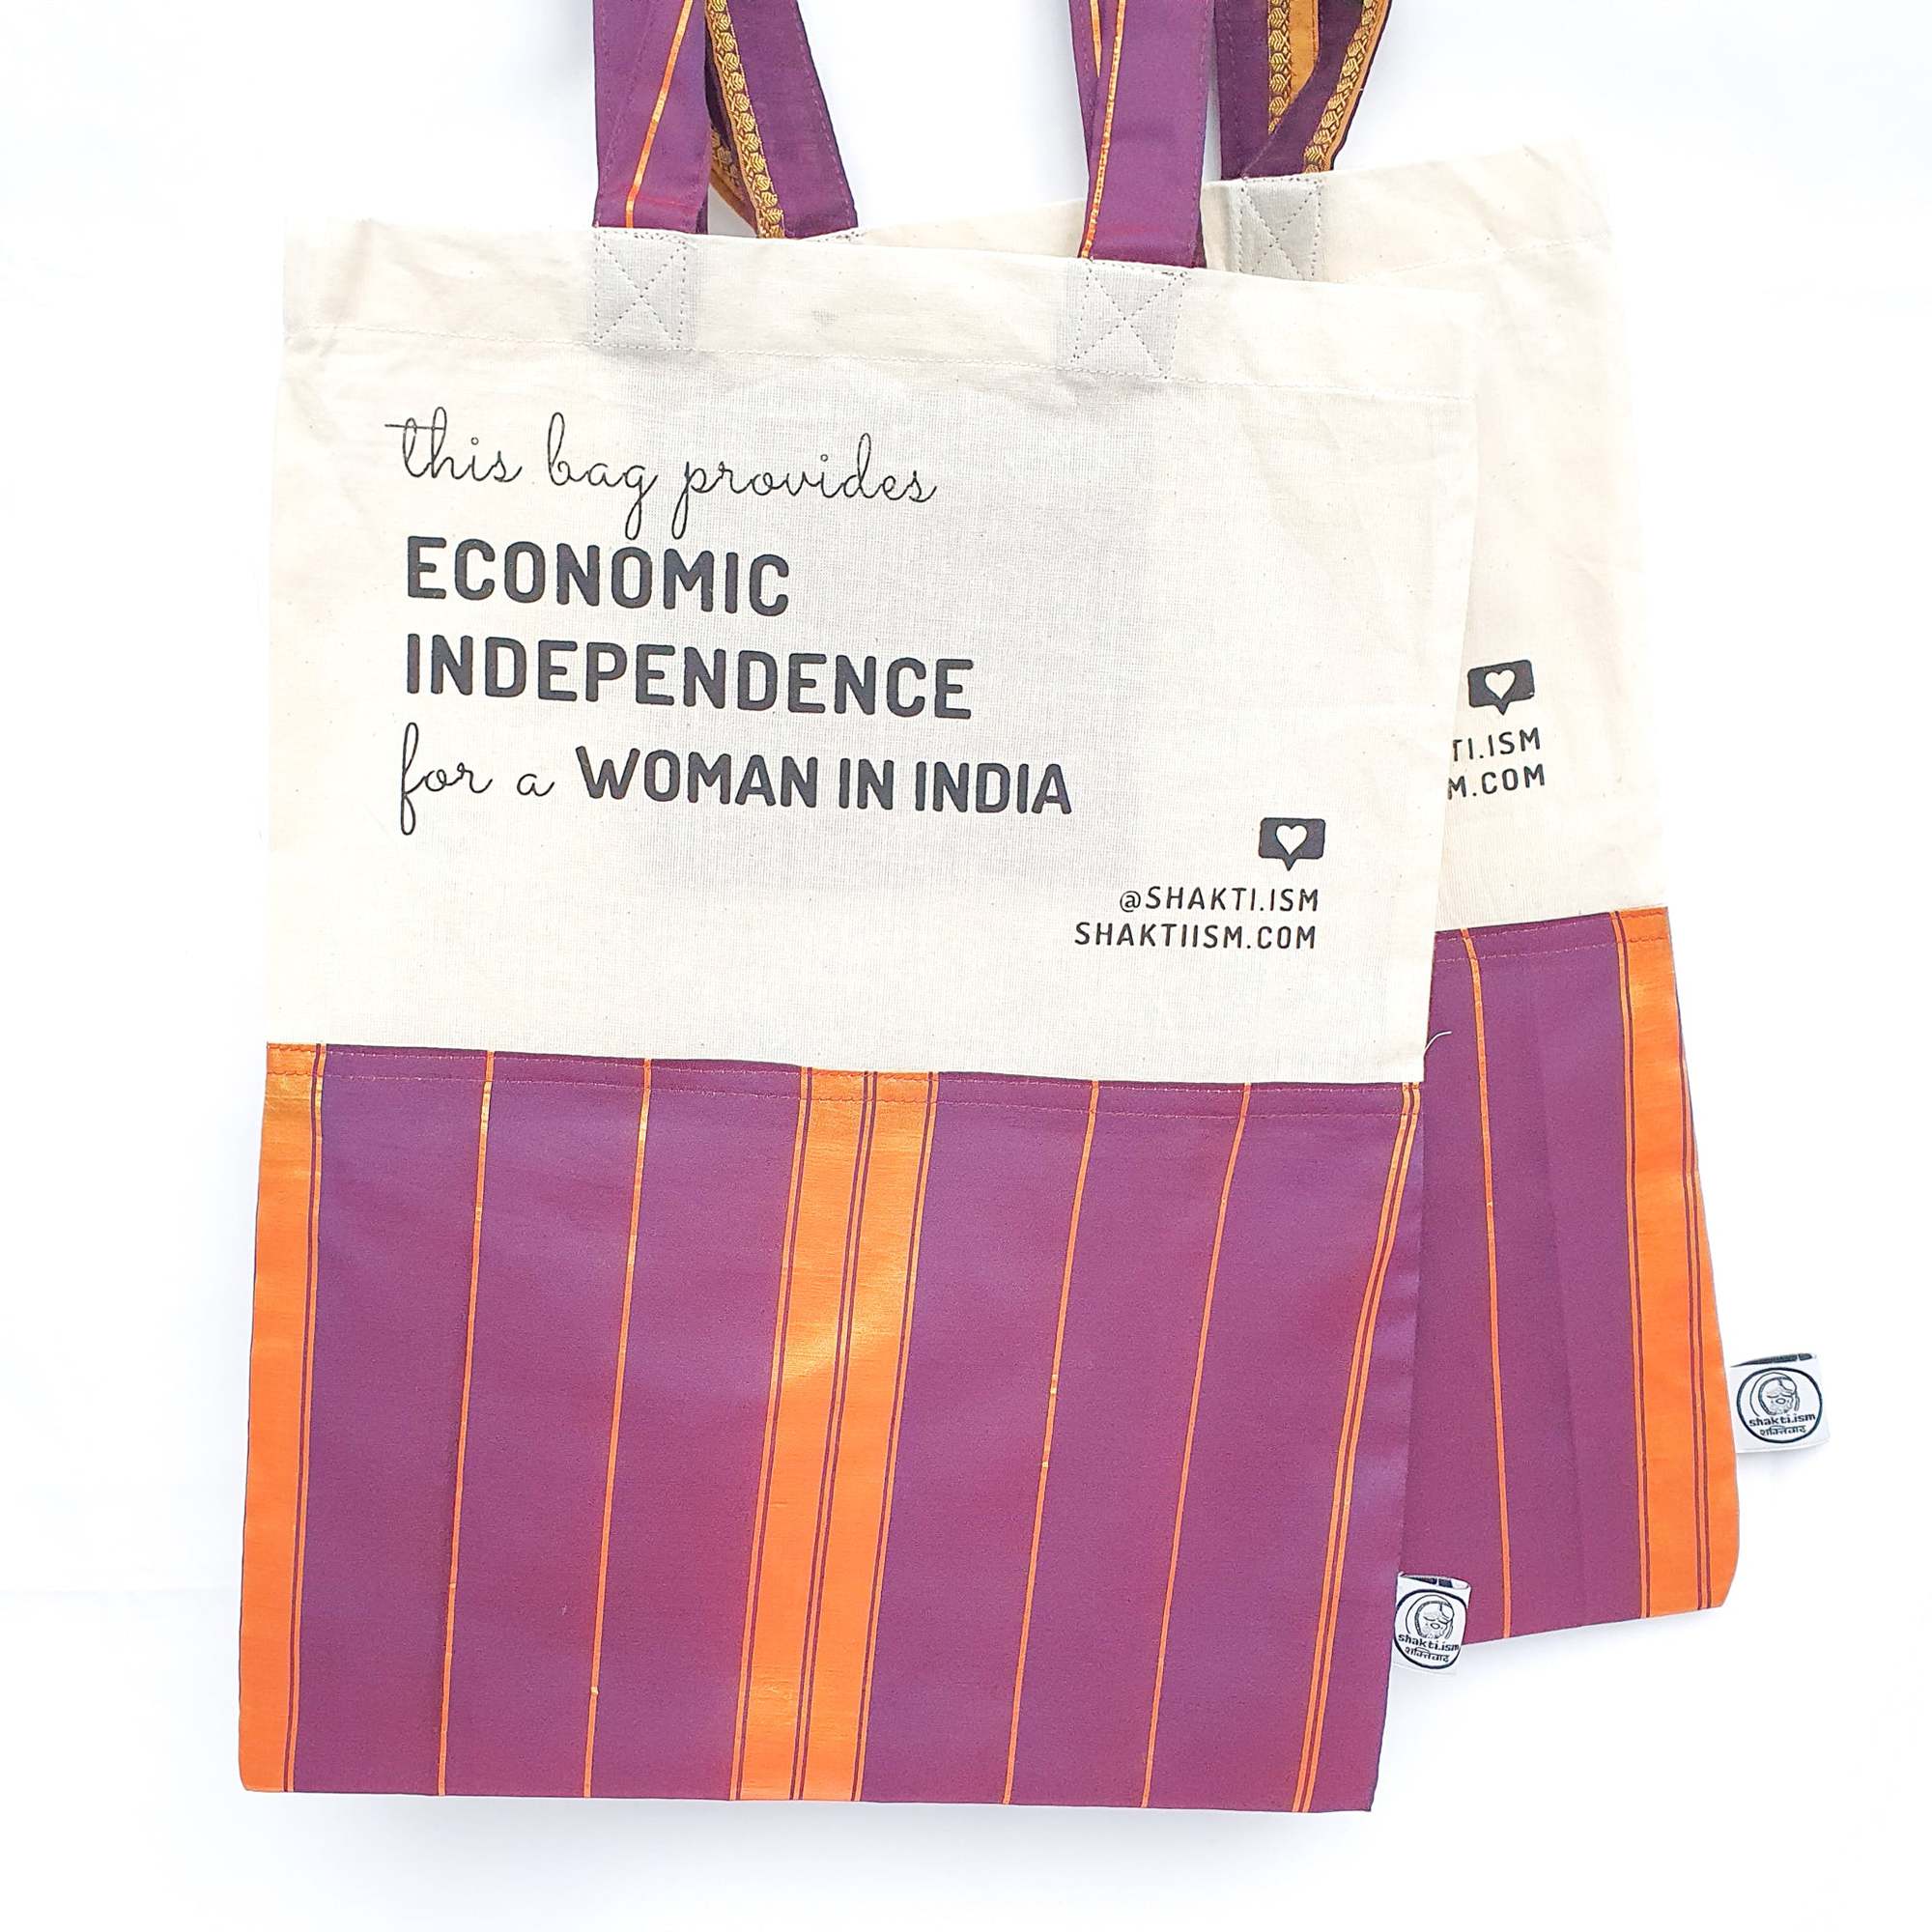 The Independence sari tote